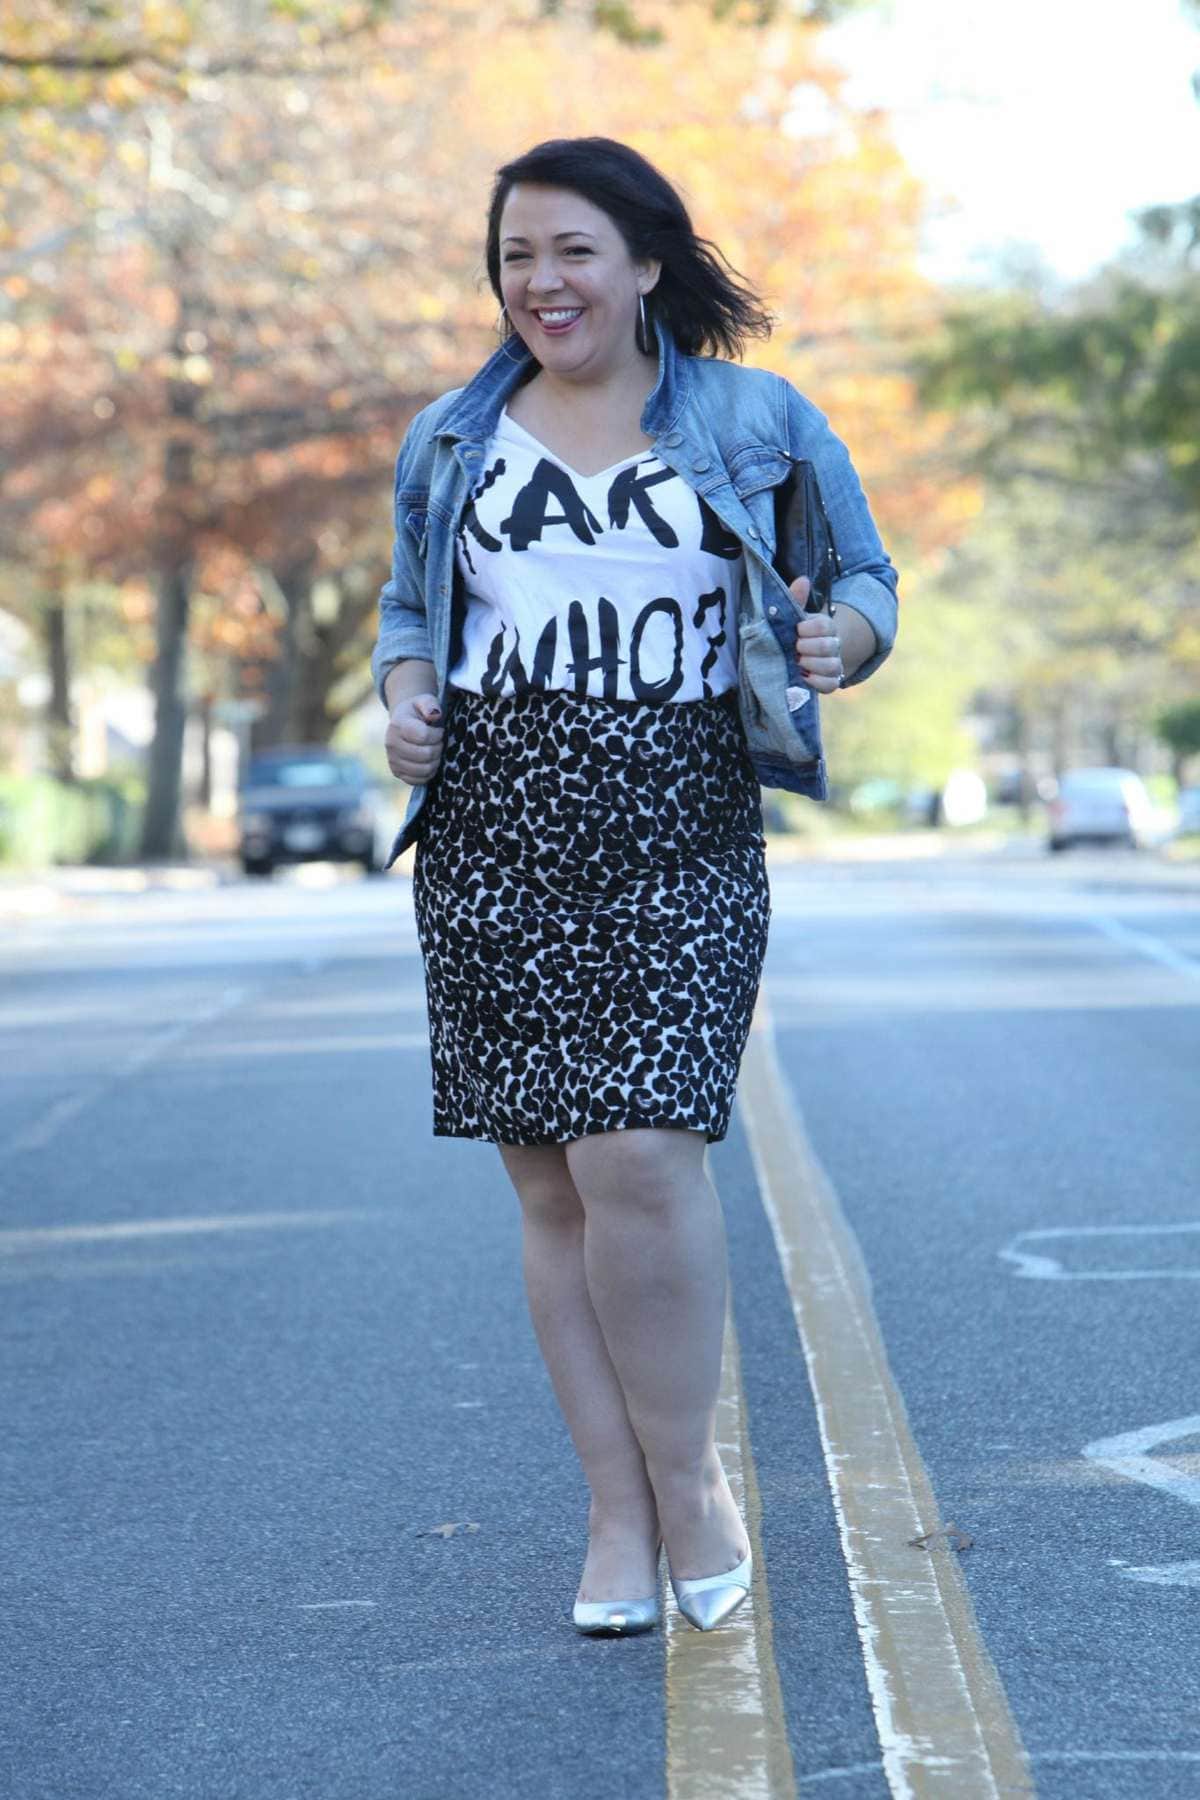 Wardrobe Oxygen wearing a J. Crew Factory denim jacket and leopard skirt and Nine West silver pumps